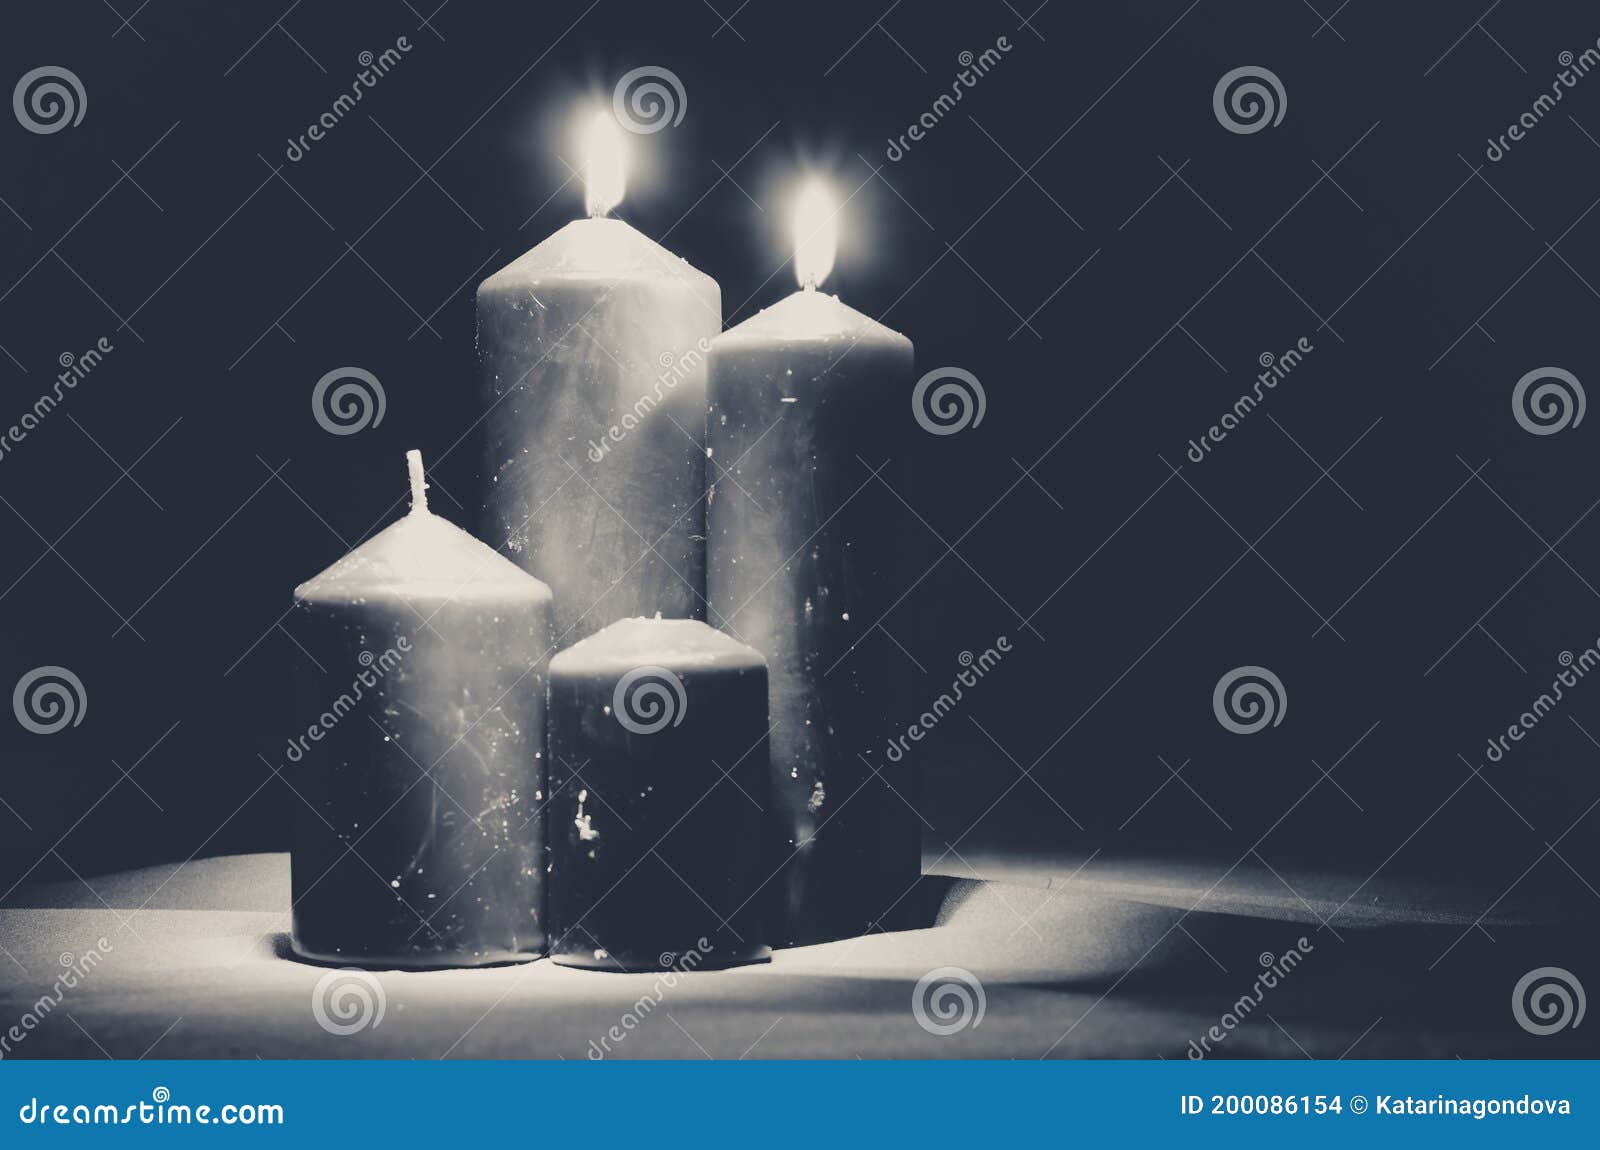 Advent Decoration with Two Burning Candles Stock Photo - Image of ...